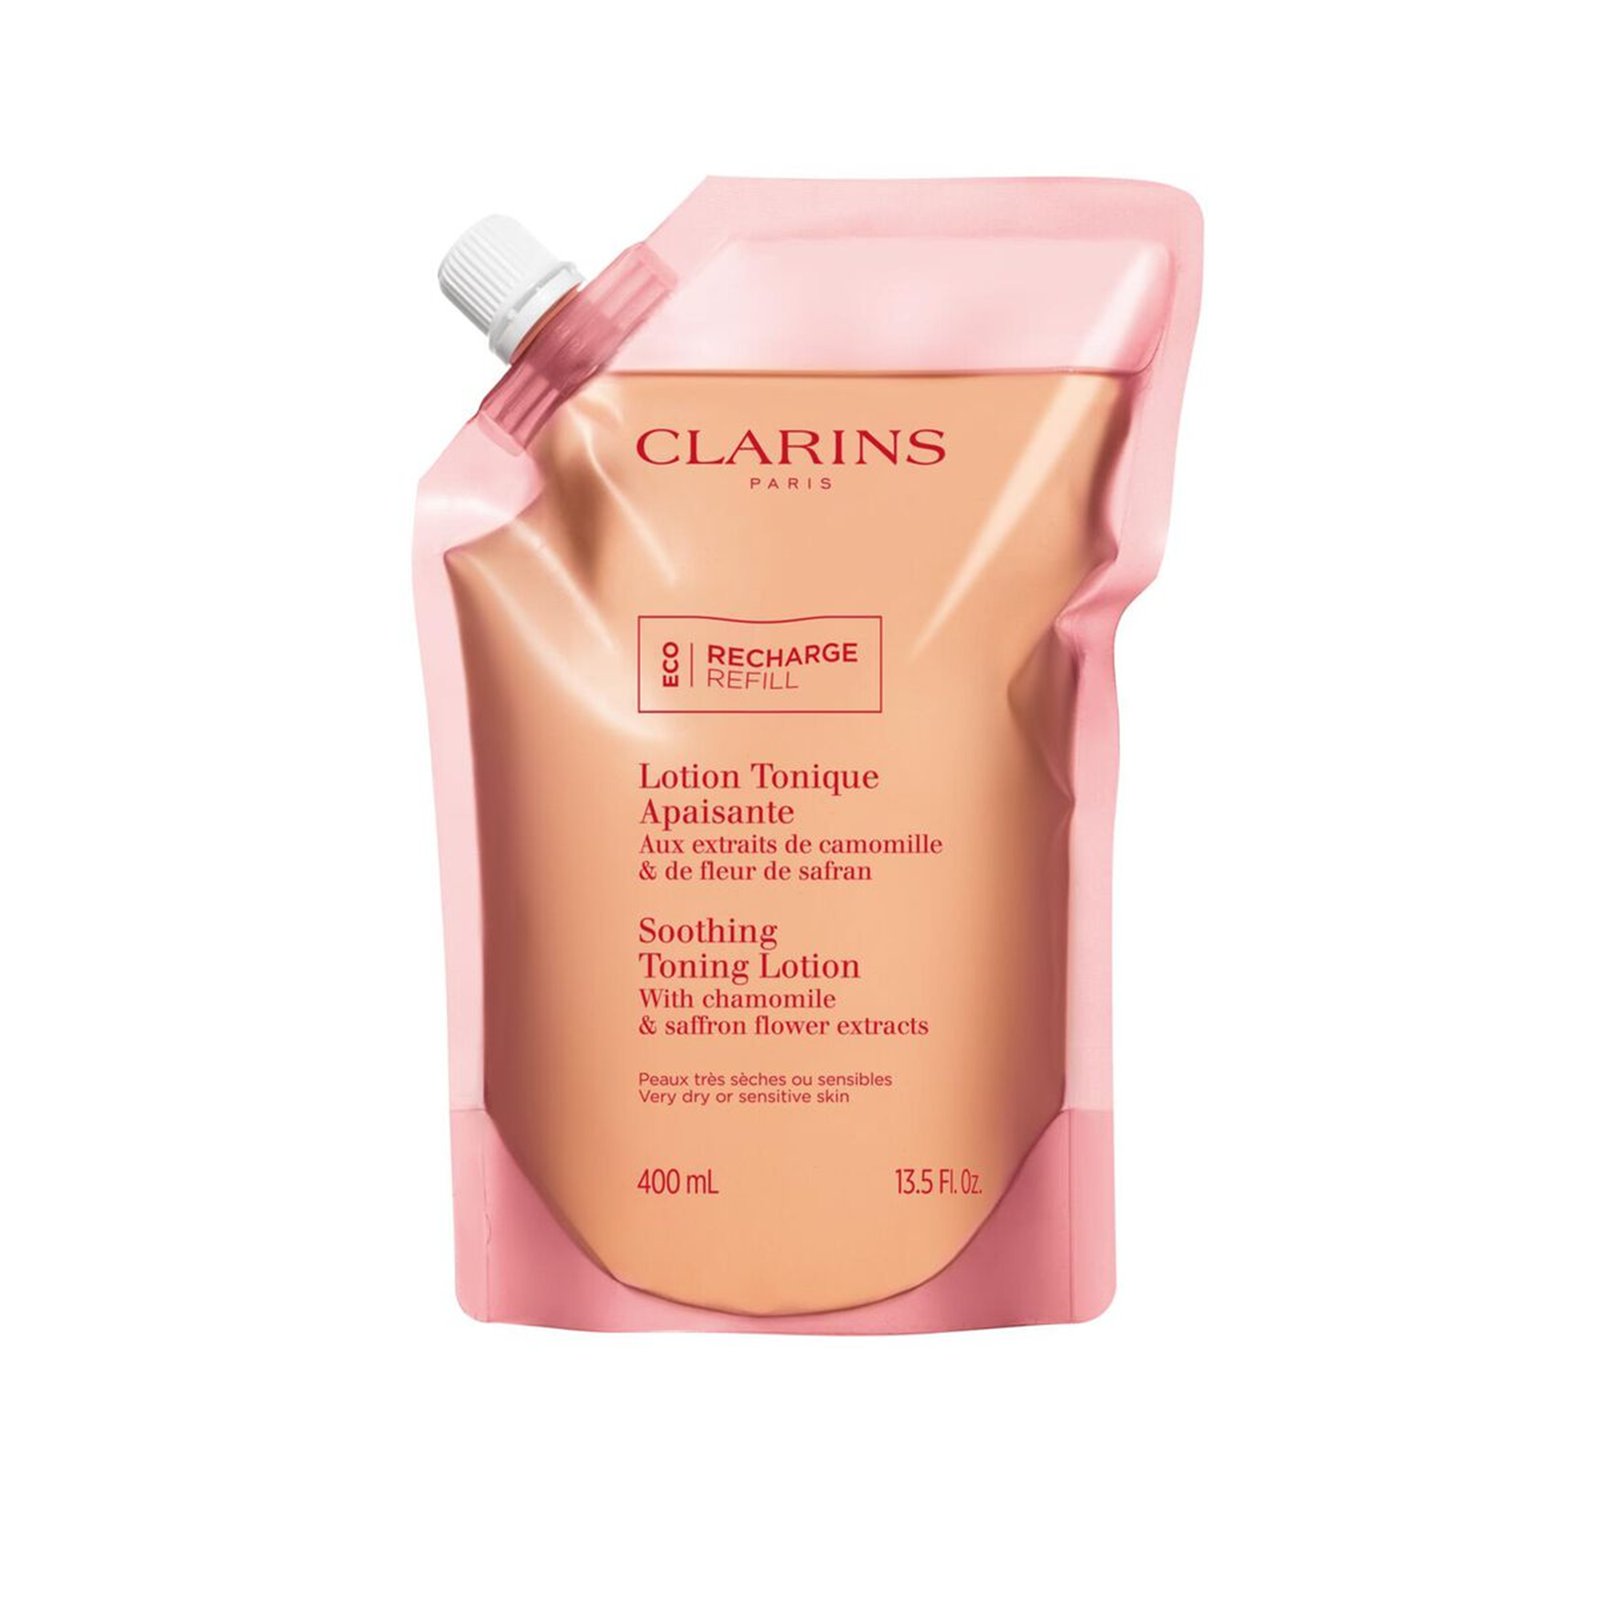 Clarins Soothing Toning Lotion Eco-Refill 400ml (13.53floz)